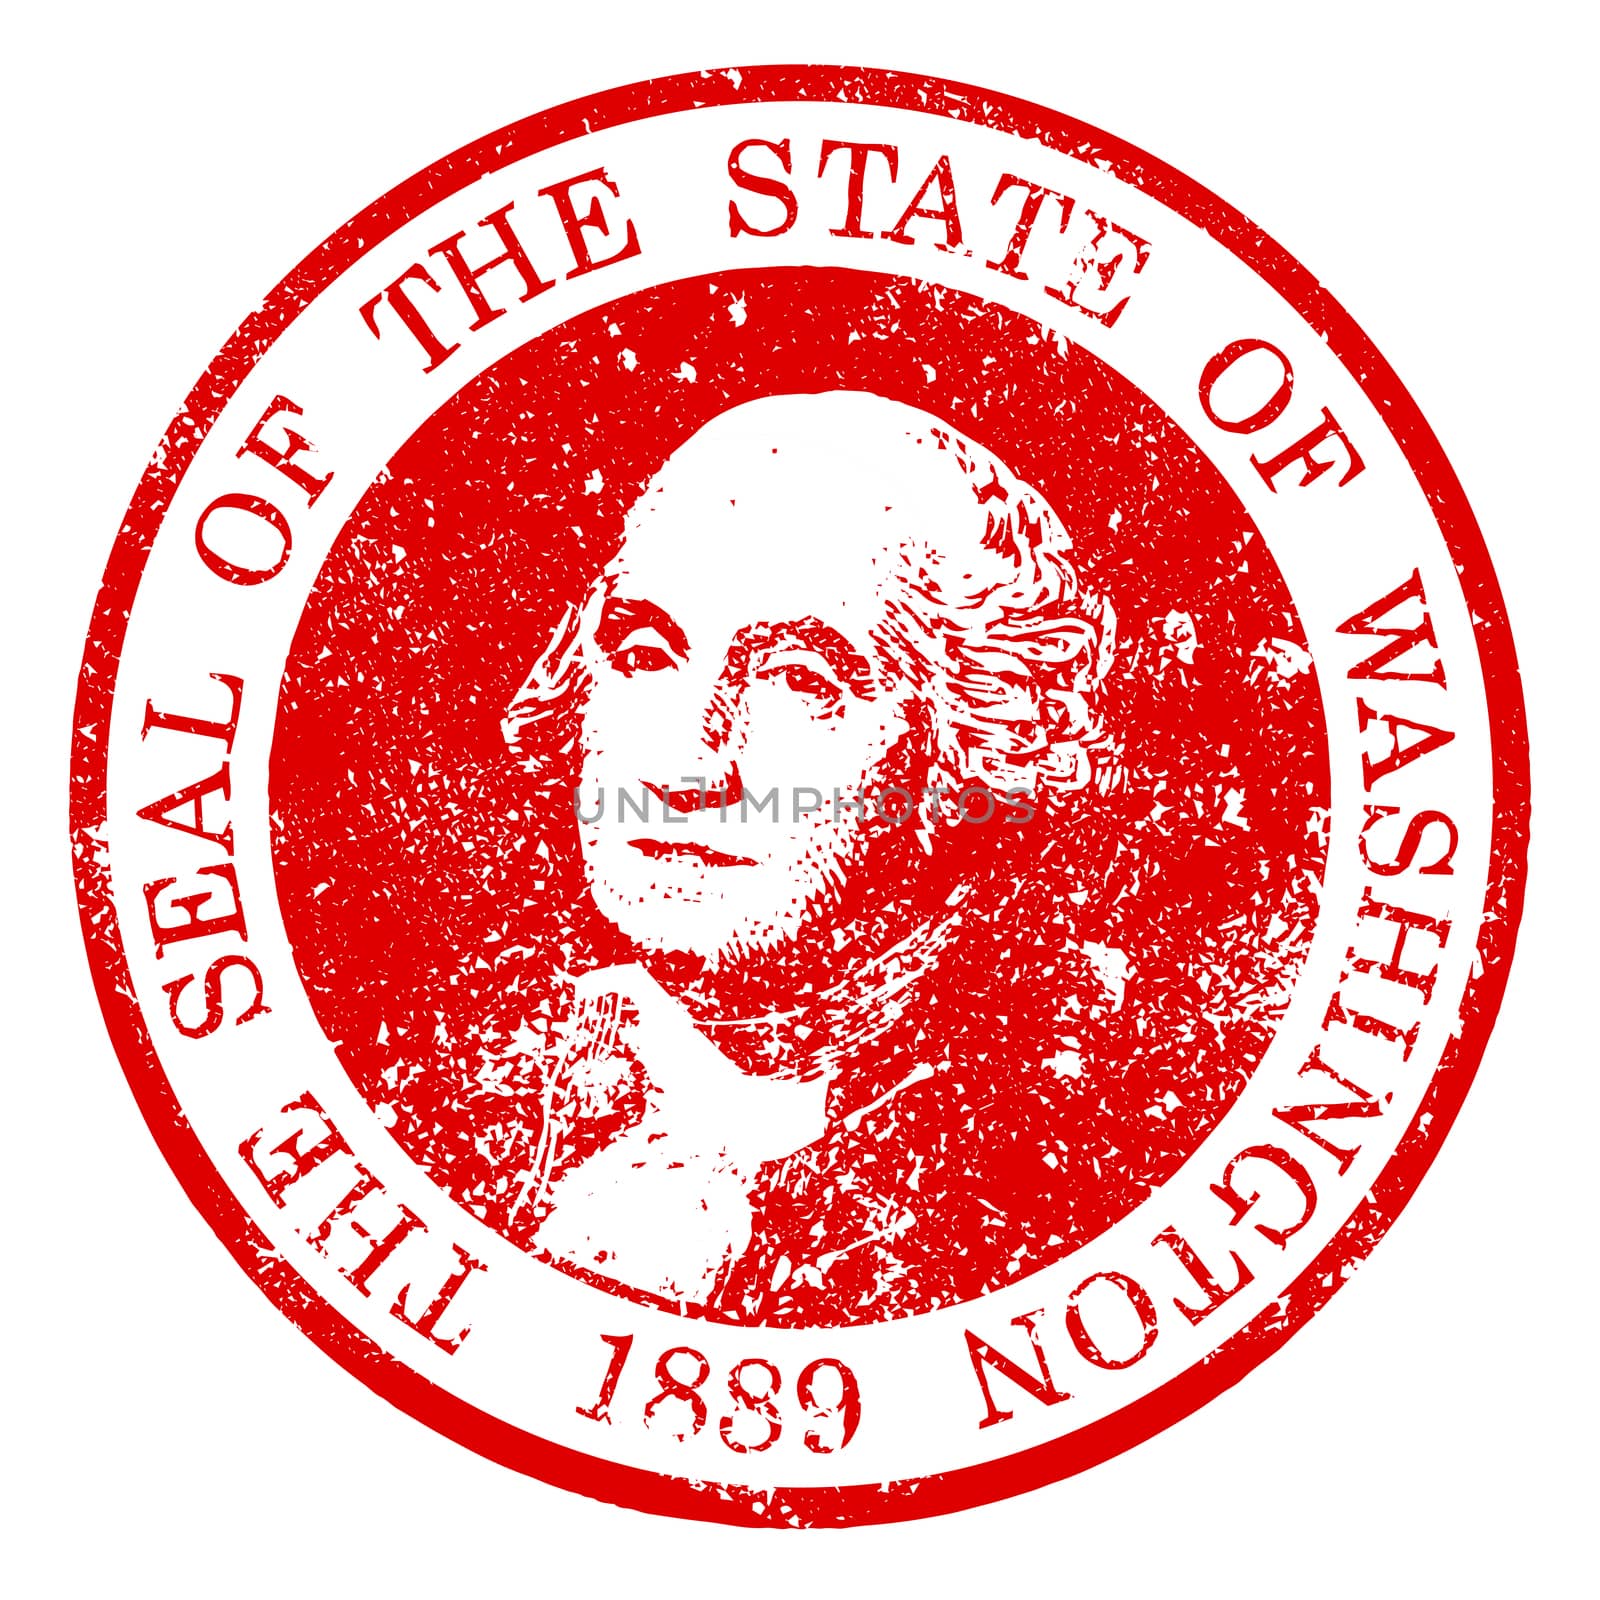 Rubber stampseal of the state of Washington on a white background